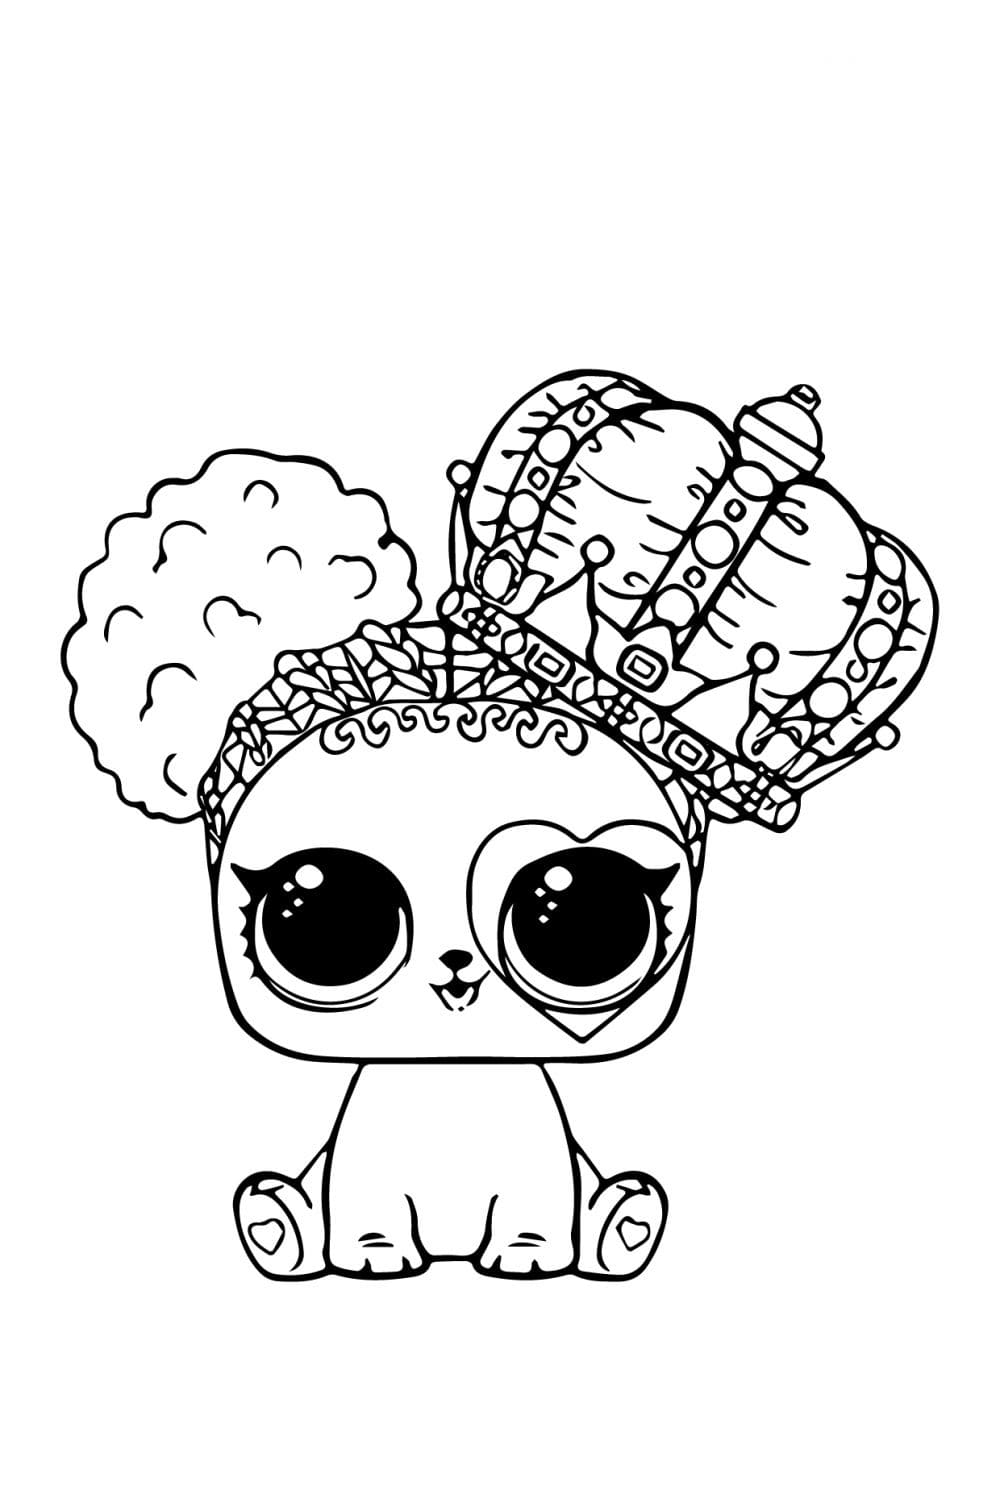 LOL Pets Coloring Pages - Free Printable Coloring Pages for Kids